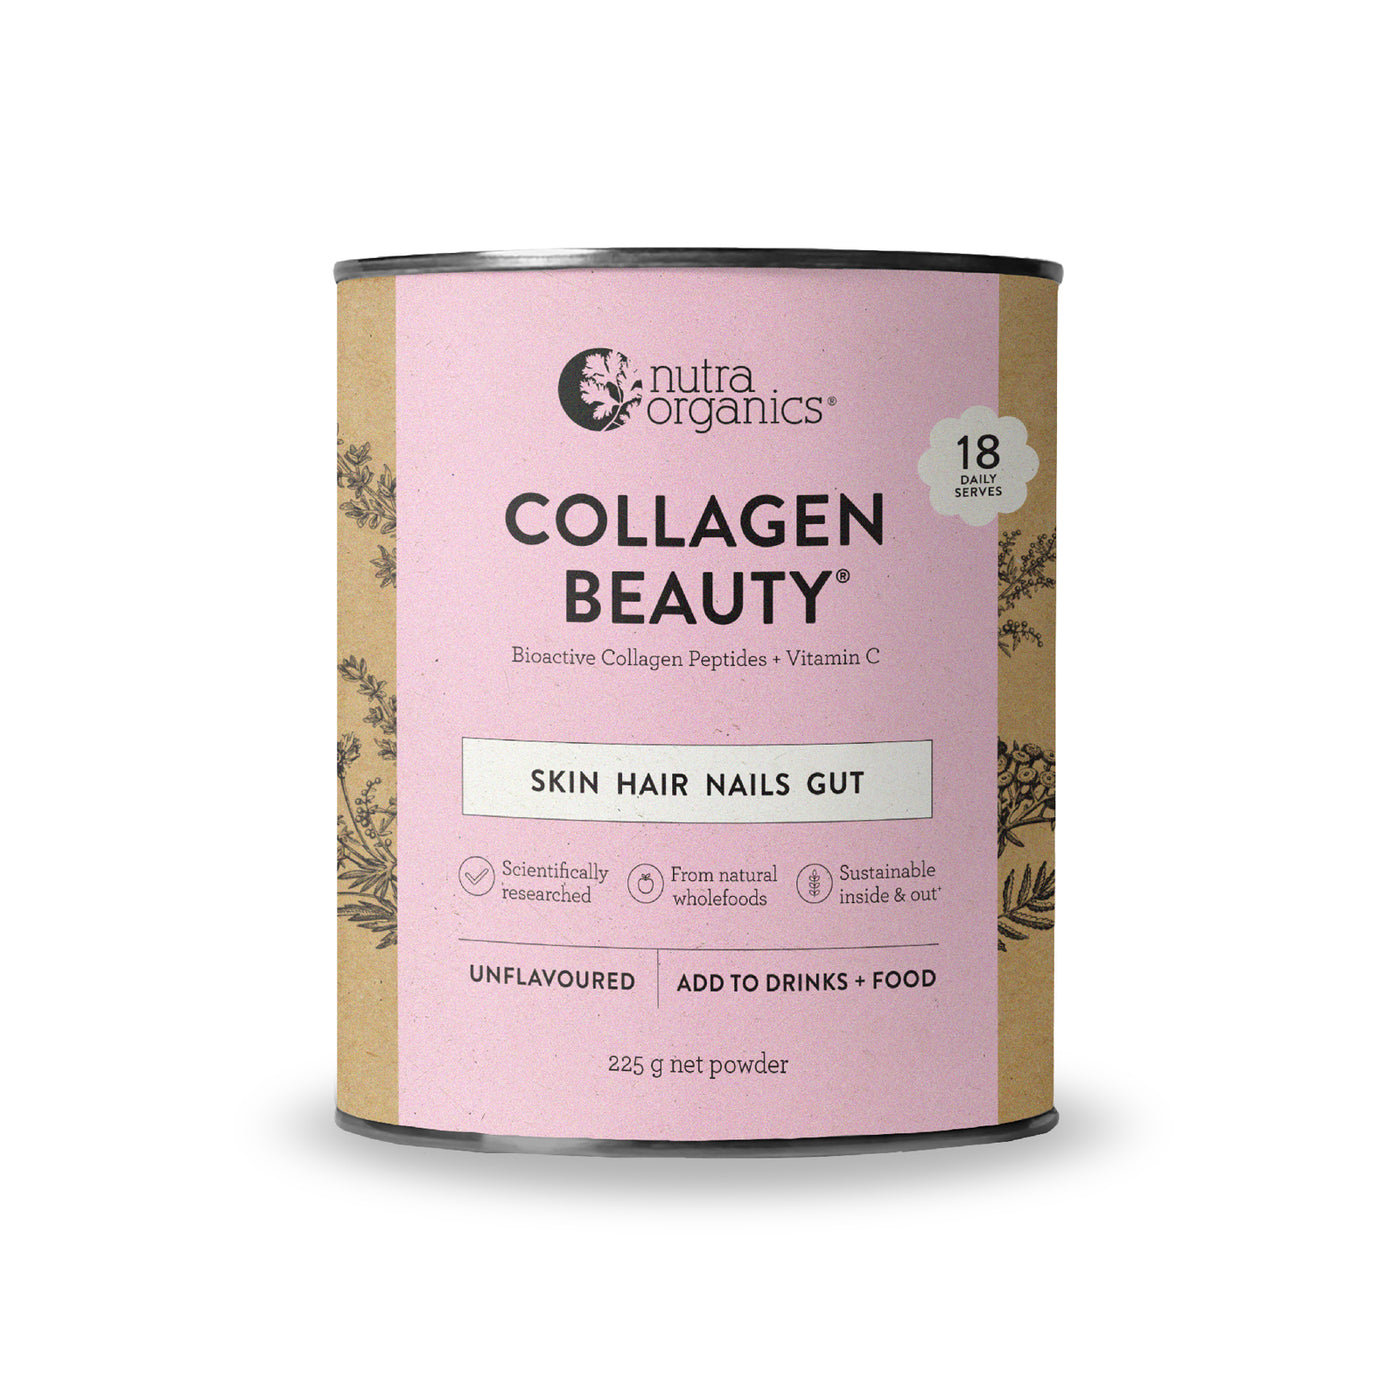 Nutra Organics Collagen Beauty with Verisol + C 225g